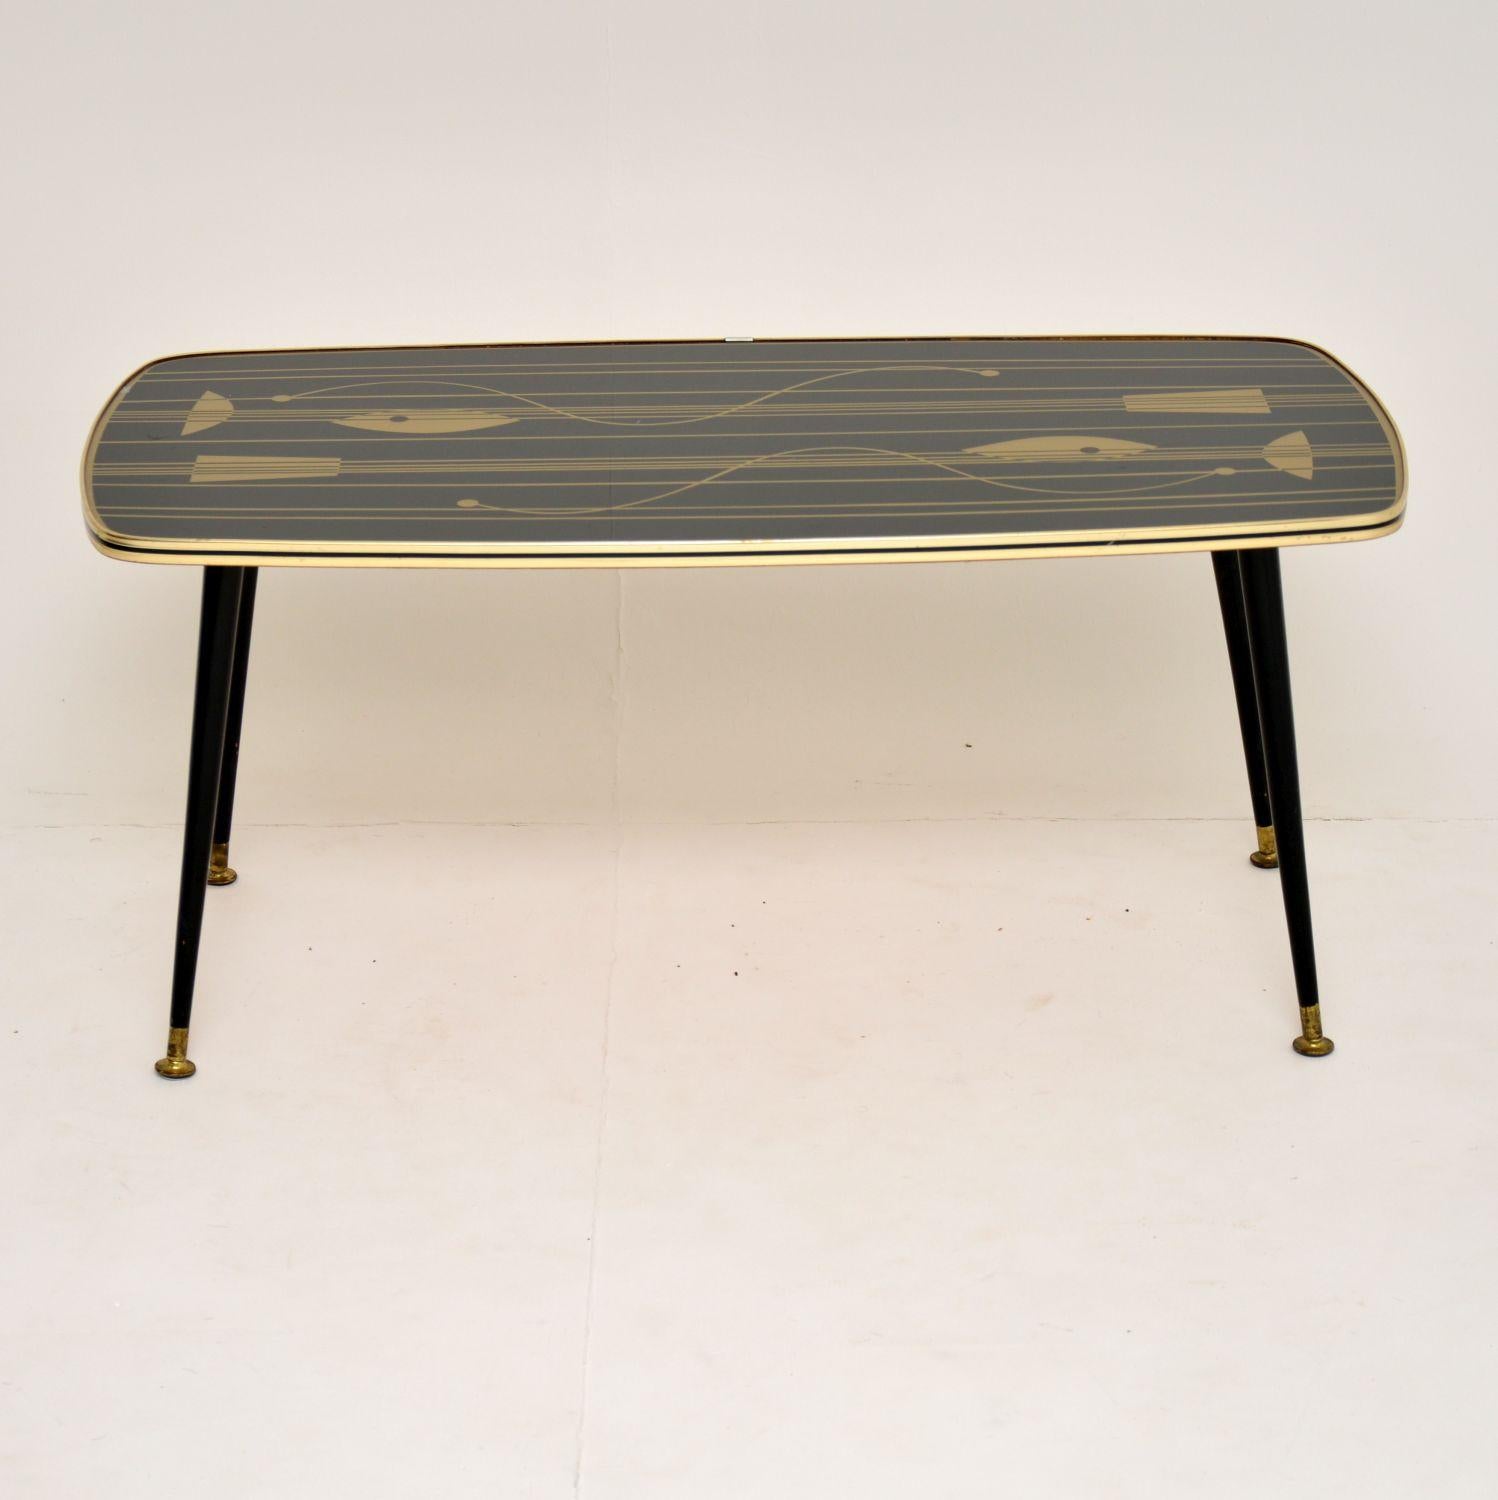 A beautifully designed vintage coffee table, this dates from the 1950s-1960s. It has a glass covered Formica top with amazing patterns, it sits on ebonized wooden legs with brass feet caps. This is in great condition for its age, with just some